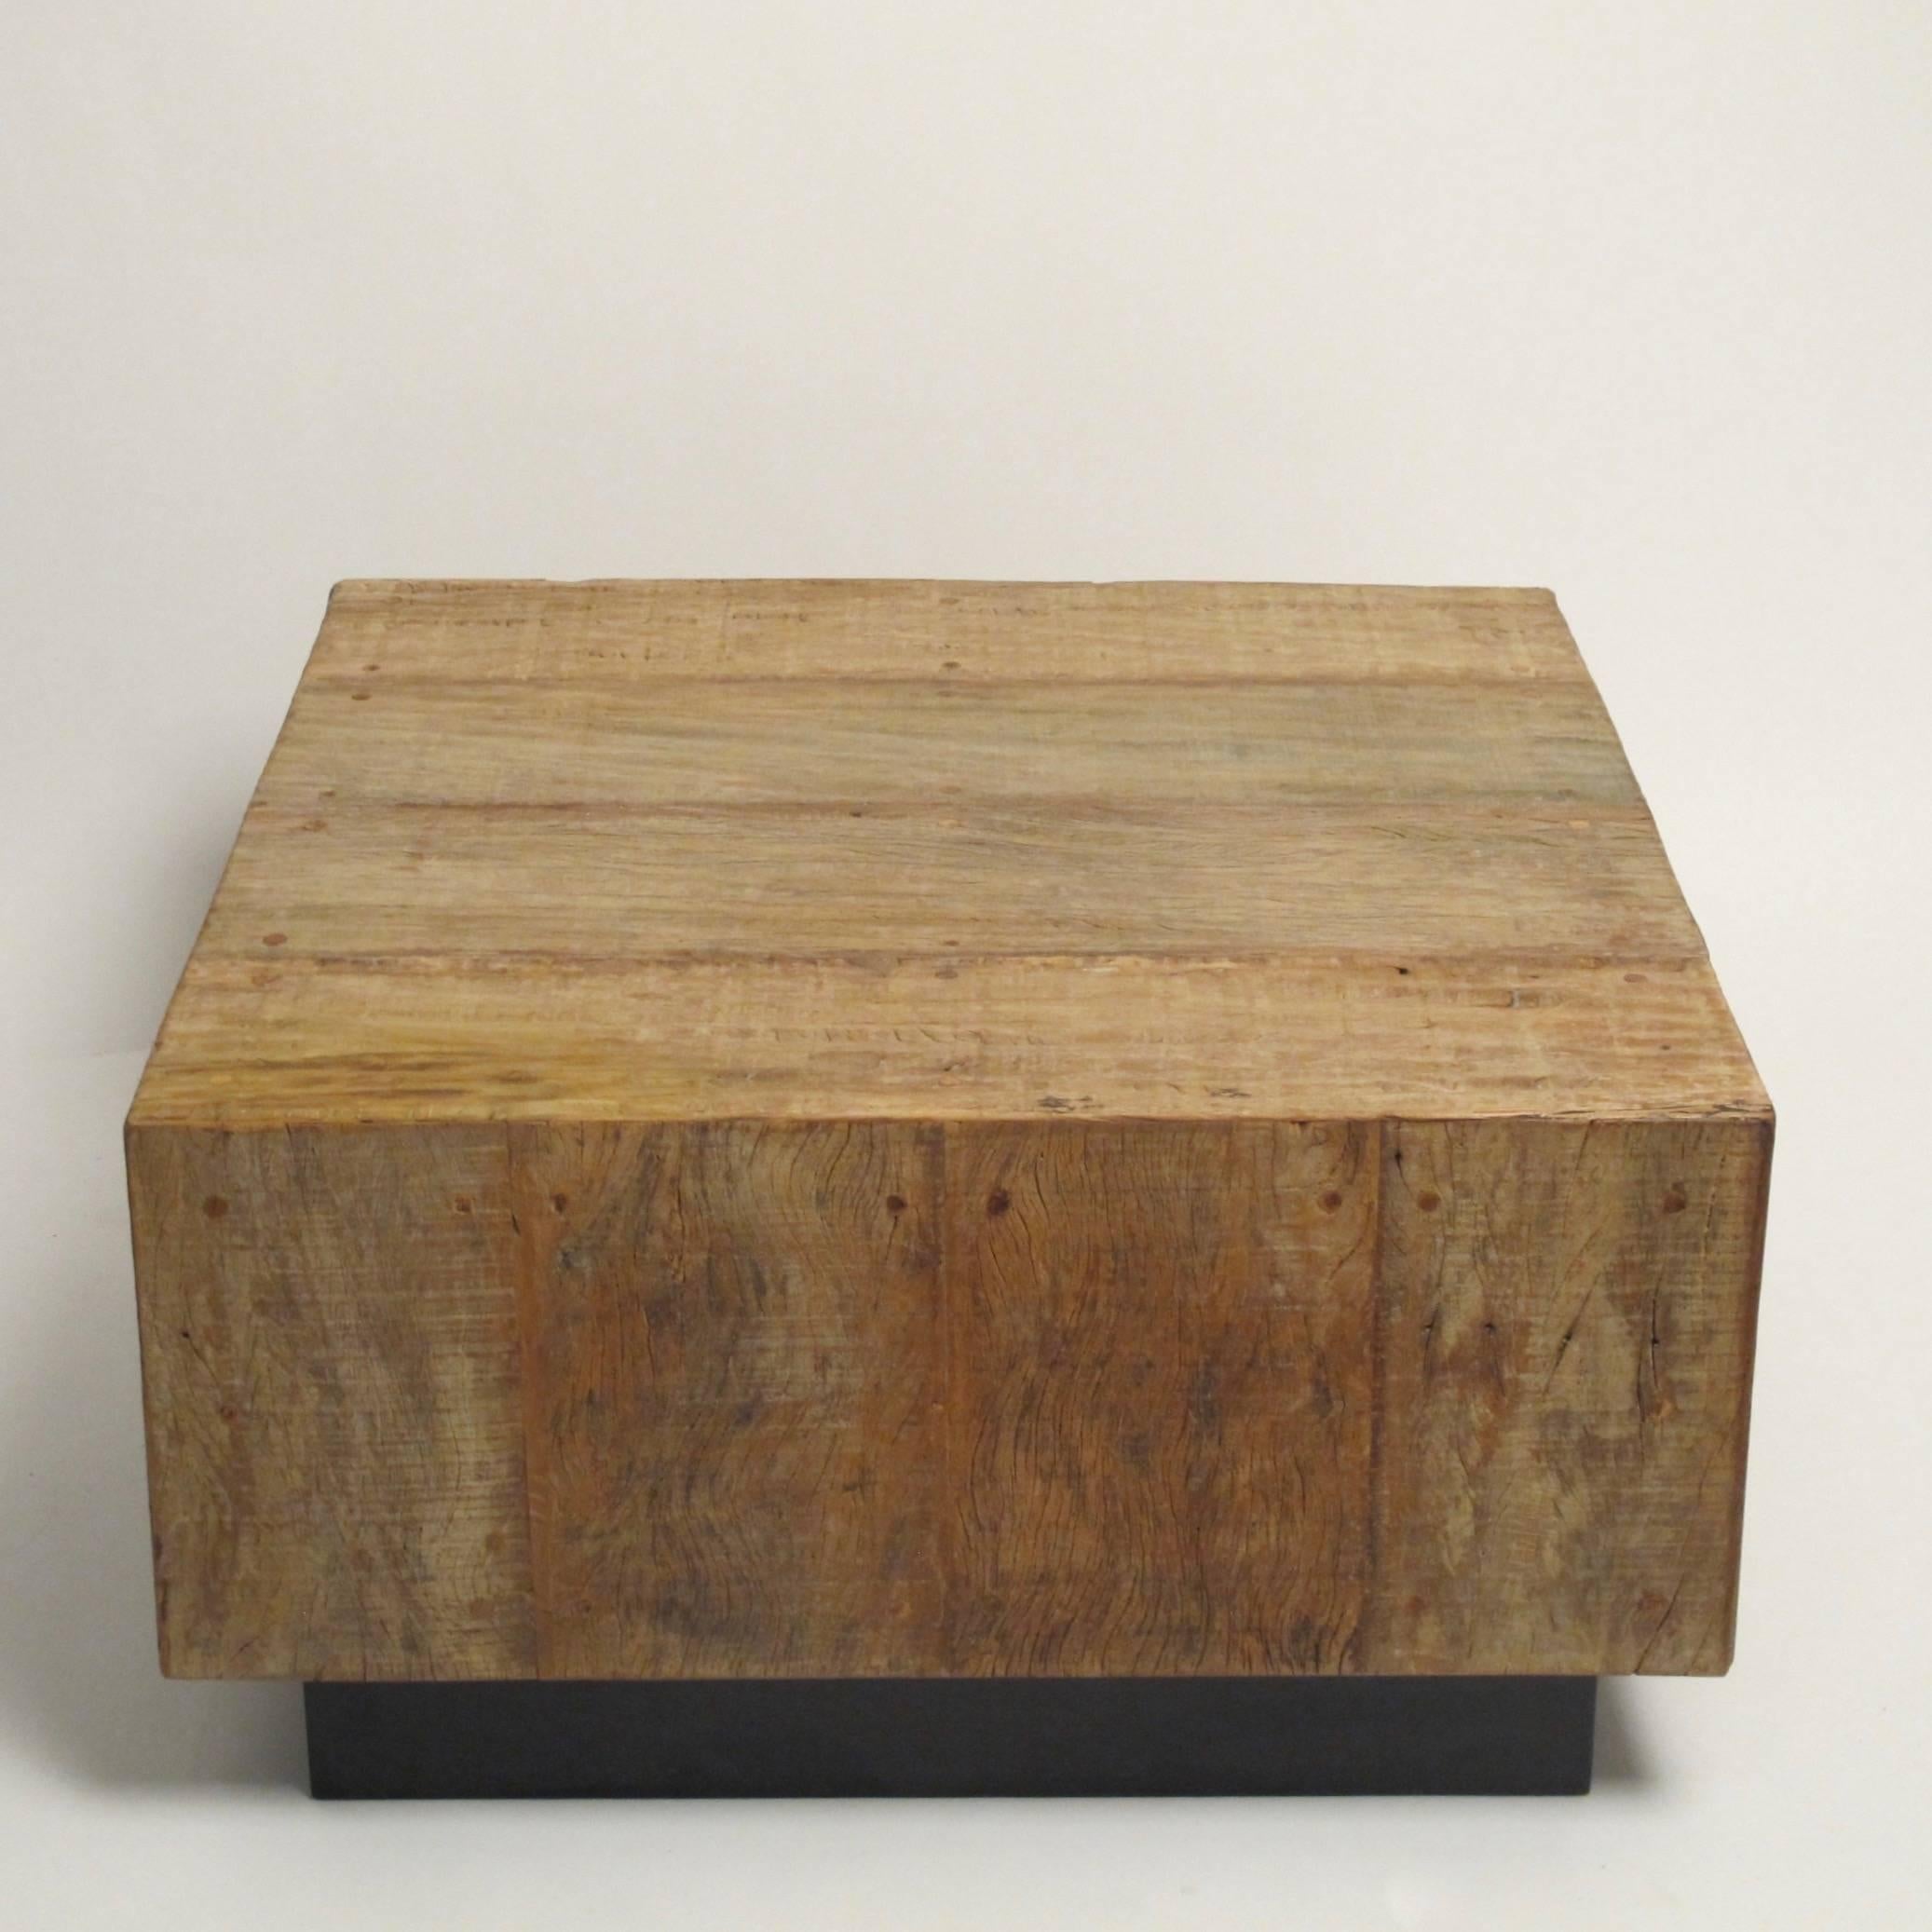 Cube shaped weathered wood coffee table on black wood base in the manner of Milo Baughman.